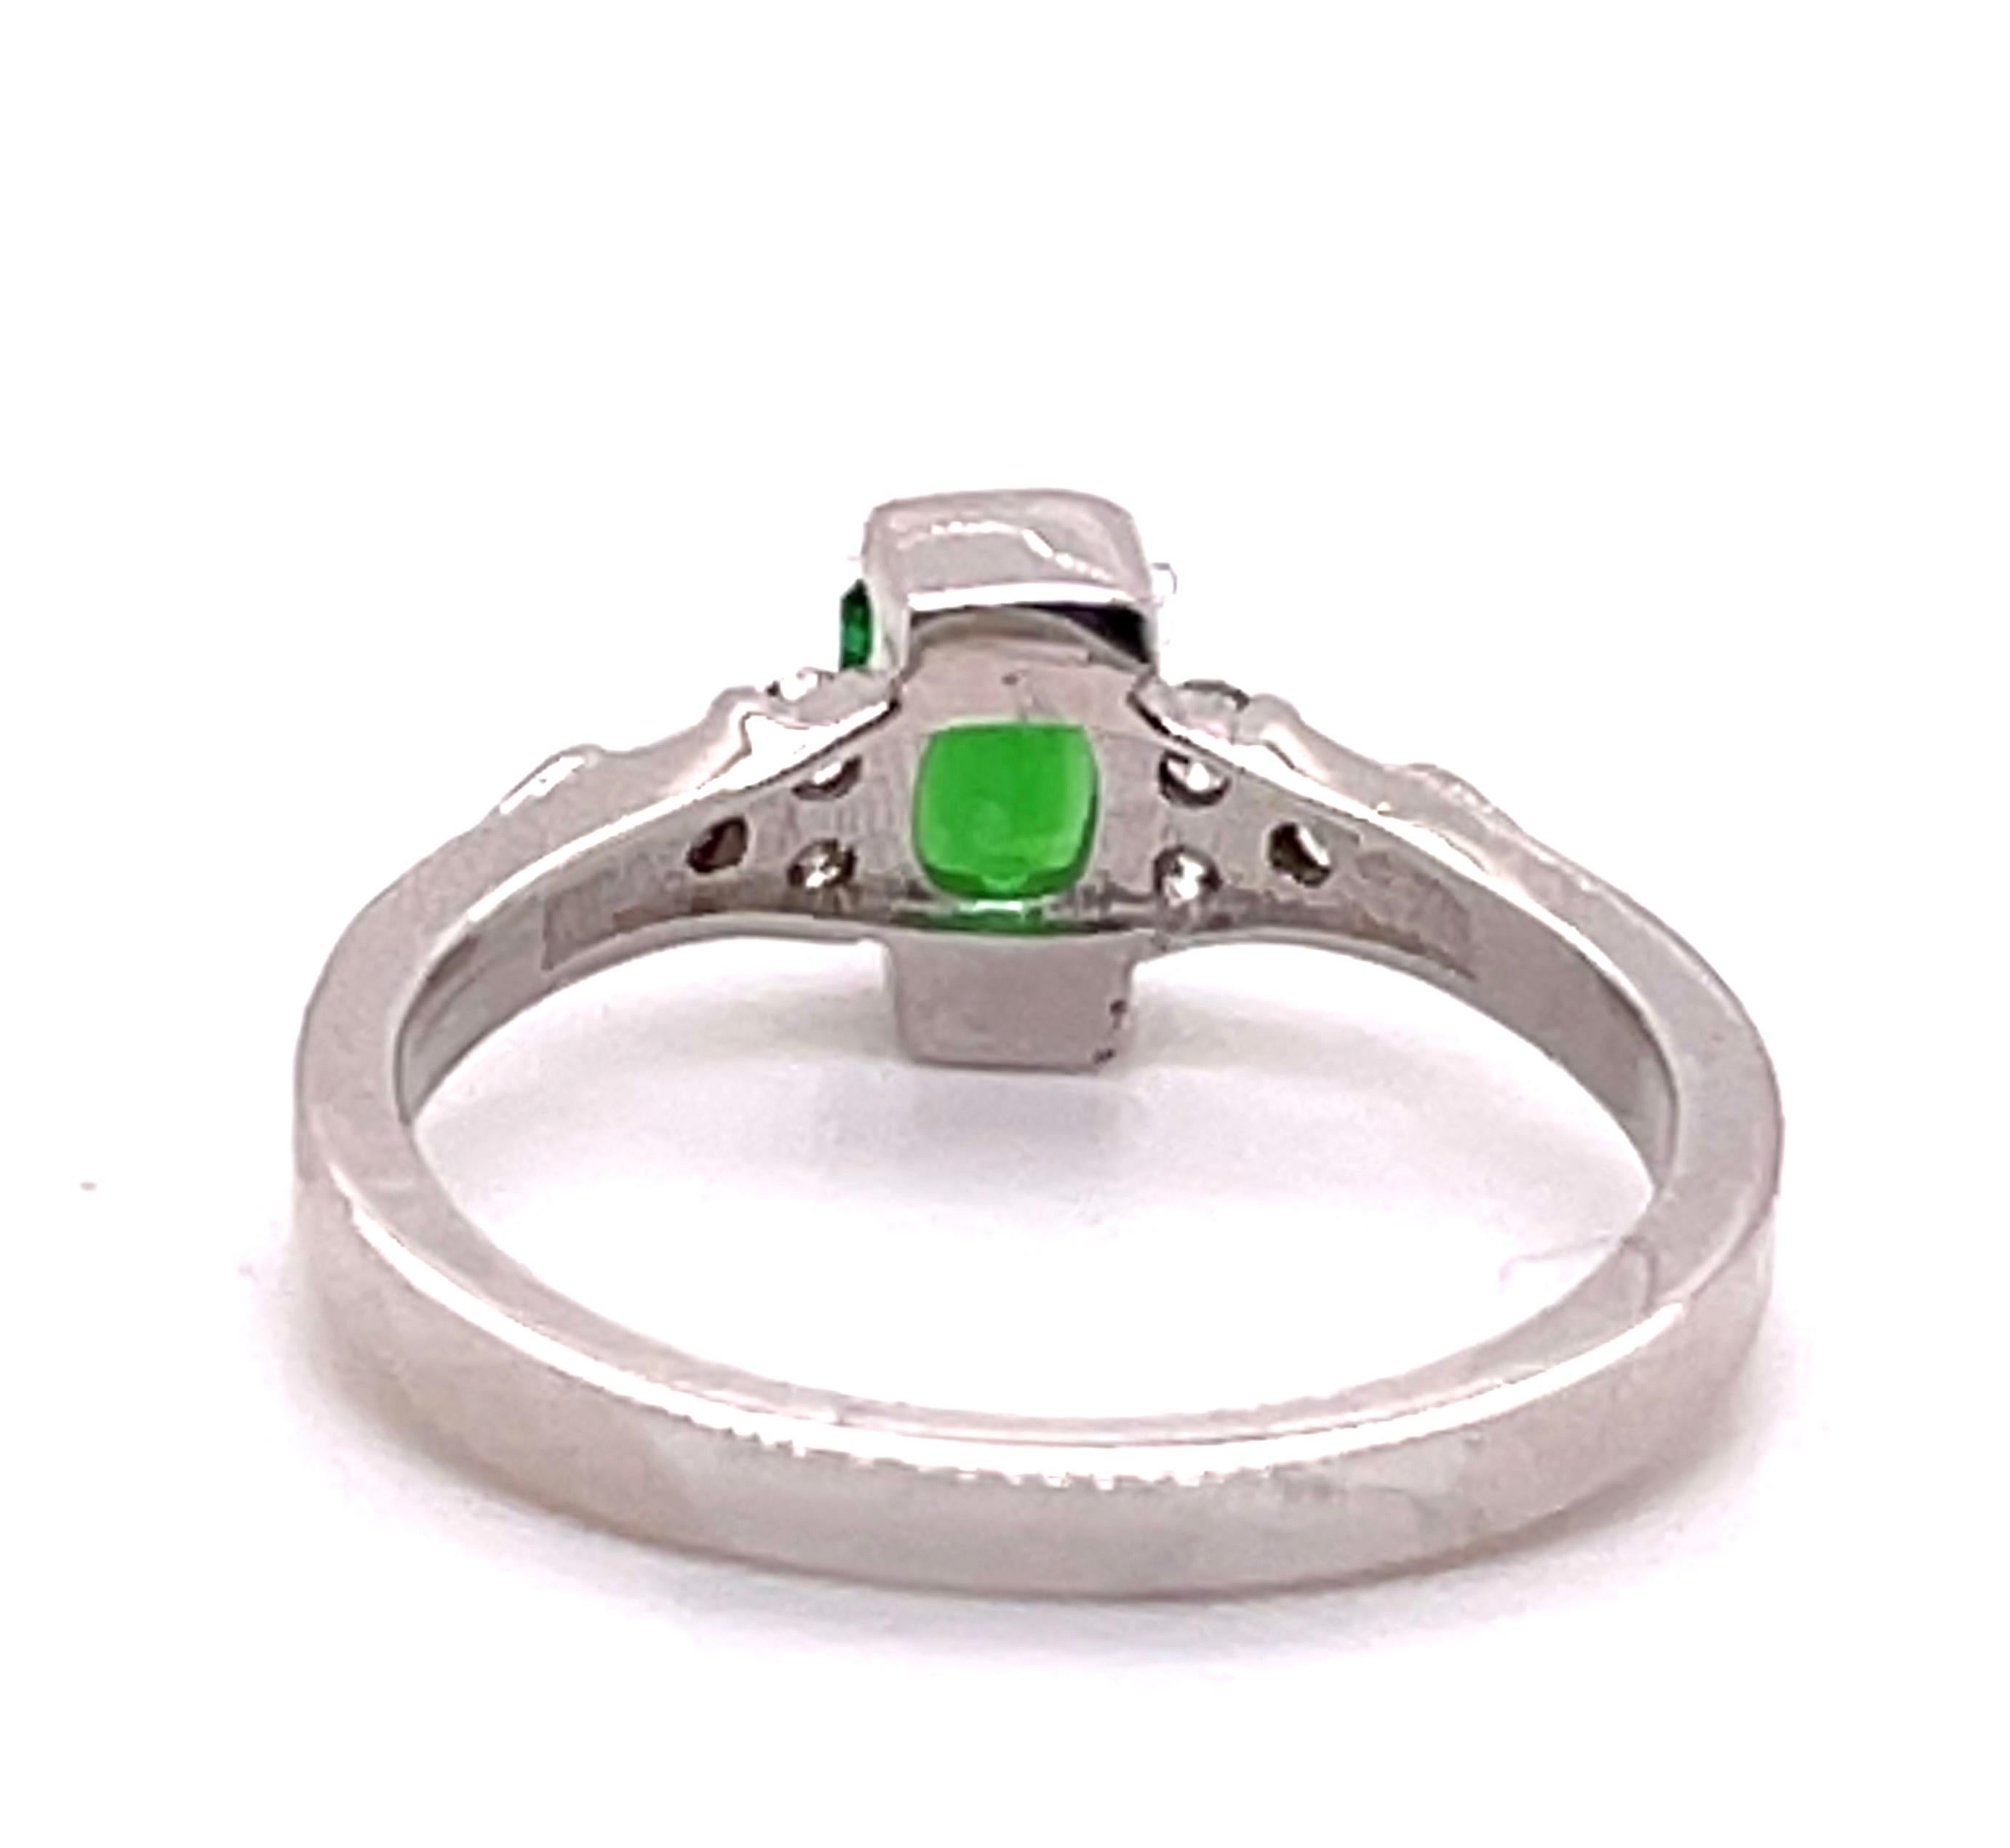 
This Tsavorite Garnet and Diamond ring in 14-karat white gold with 6 round Diamonds weighing 0.23 carats, with G color and VS clarity. The center stone is a 0.65 ct barion cut Tsavorite Garnet from Tanzania. The intense color of the stone makes up